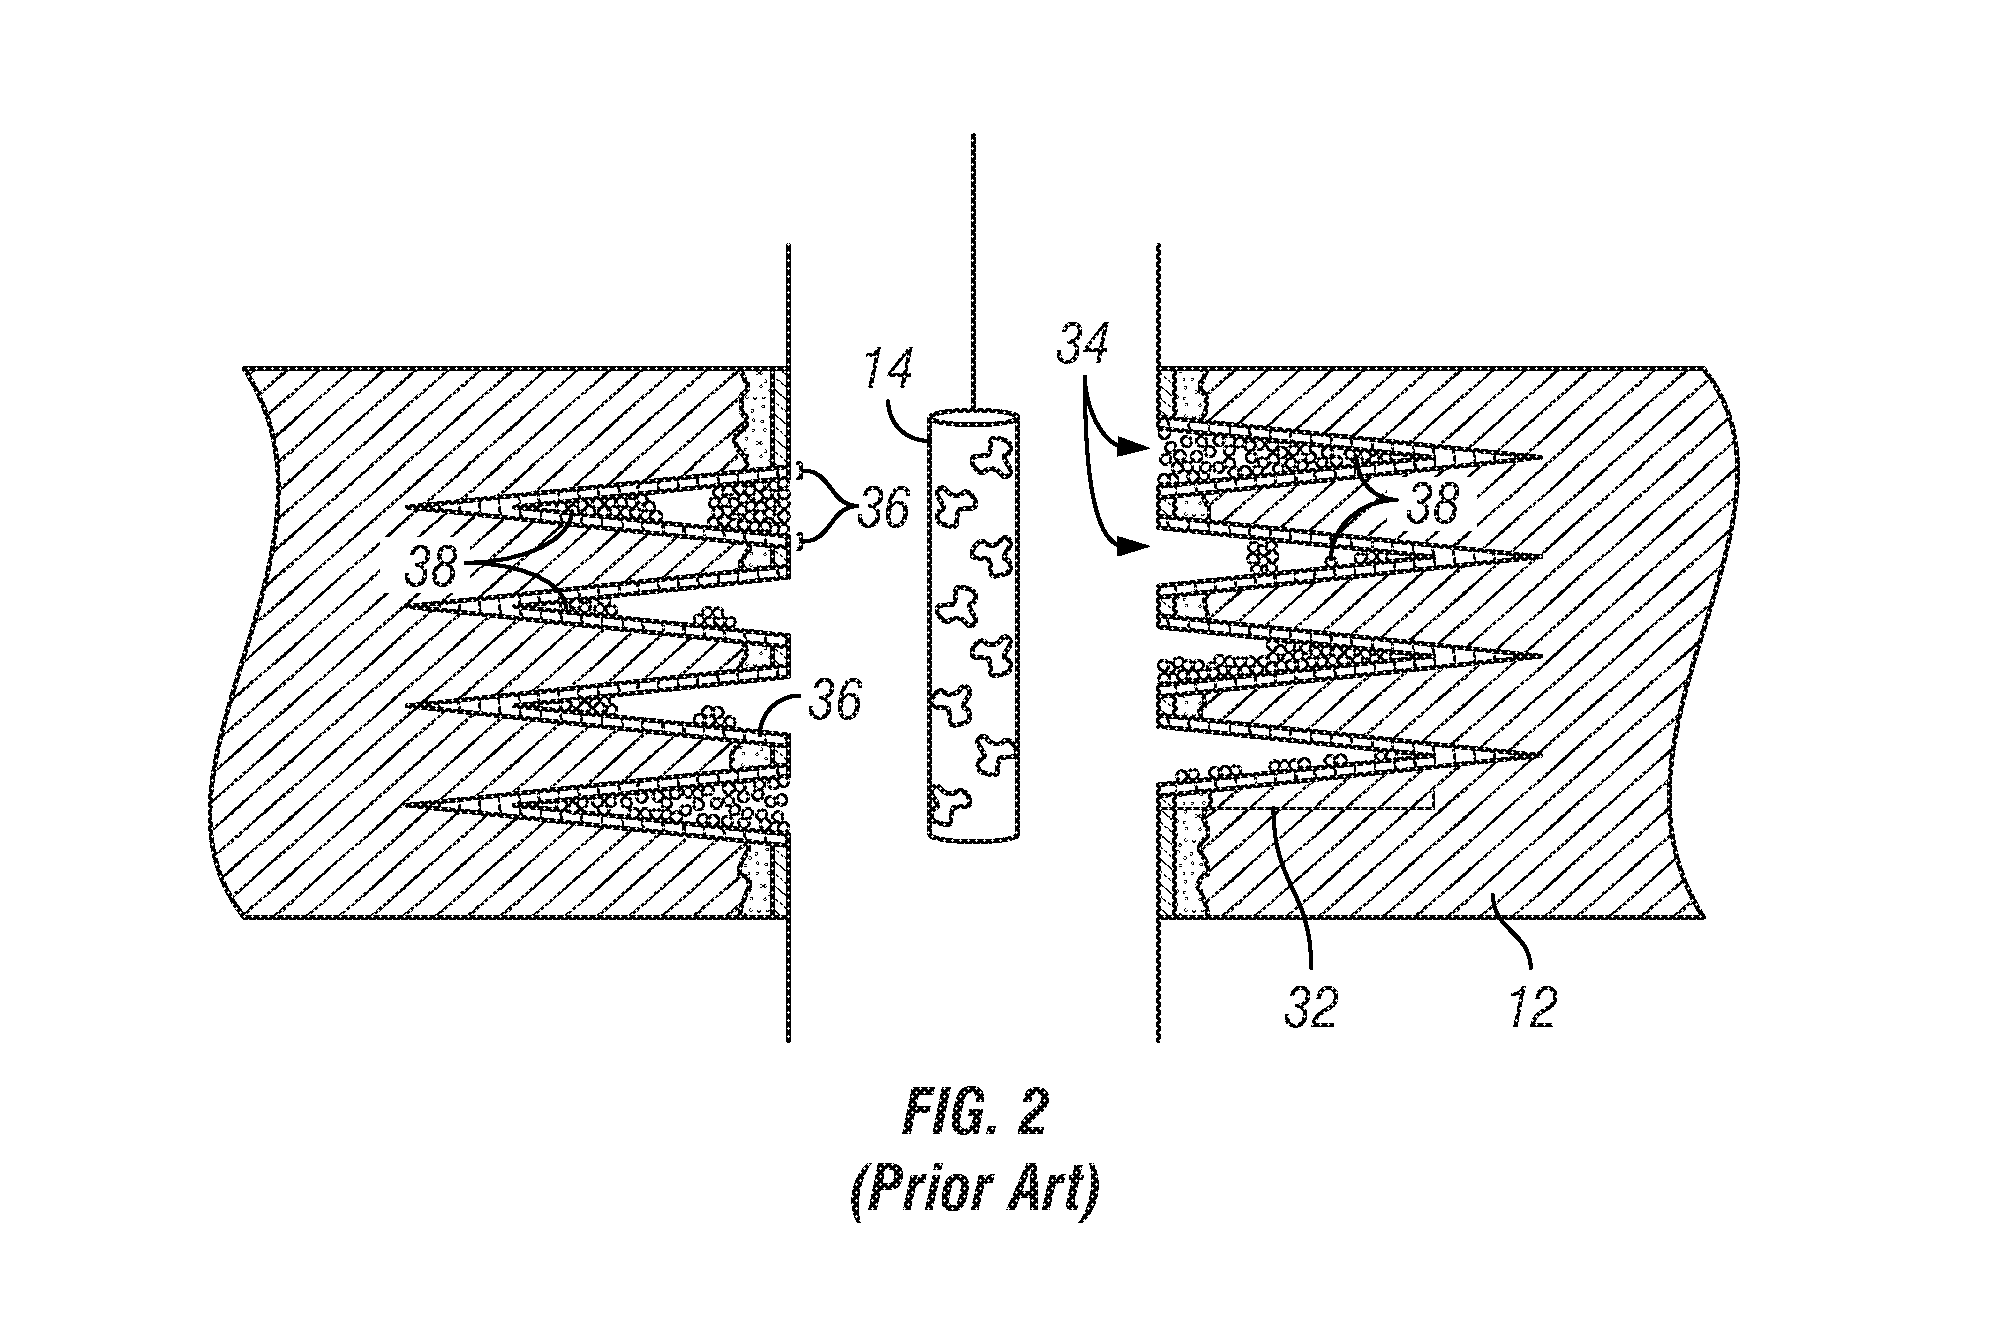 Method for the Enhancement of Injection Activities and Stimulation of Oil and Gas Production